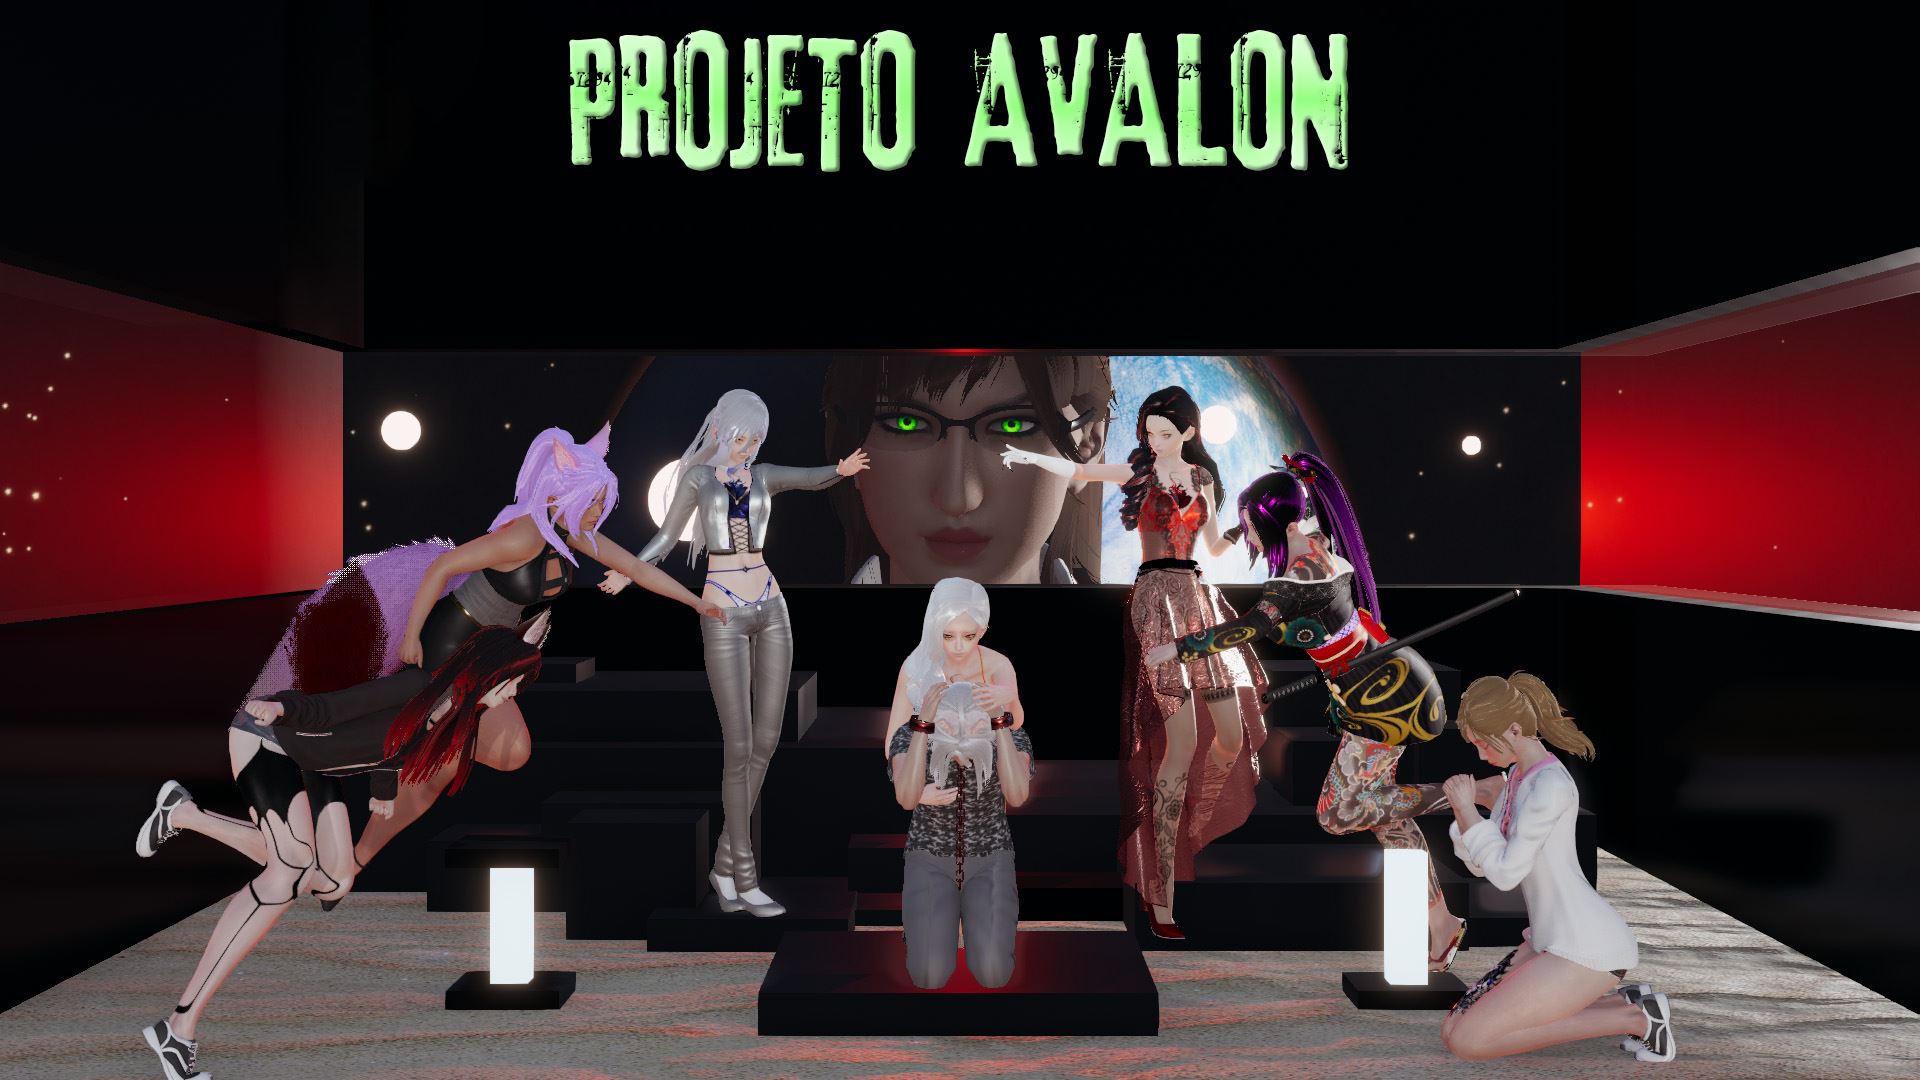 Avalon Project porn xxx game download cover